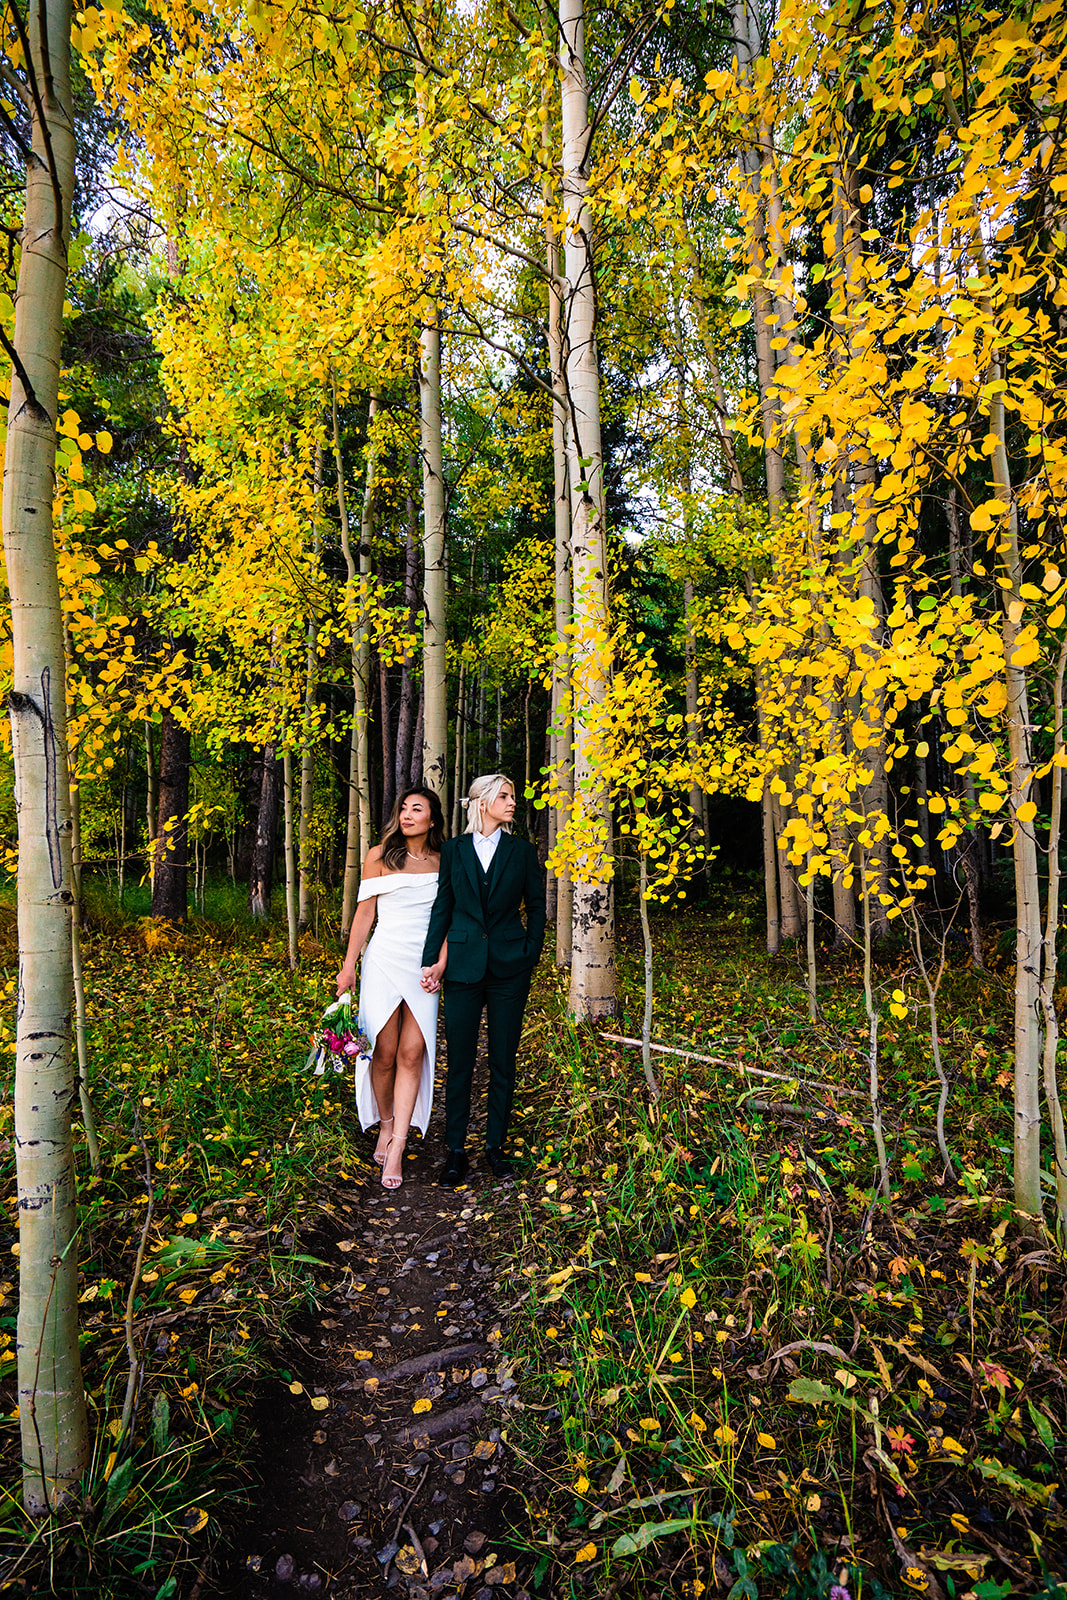 Two brides elope in Crested Butte in Colorado among aspen trees